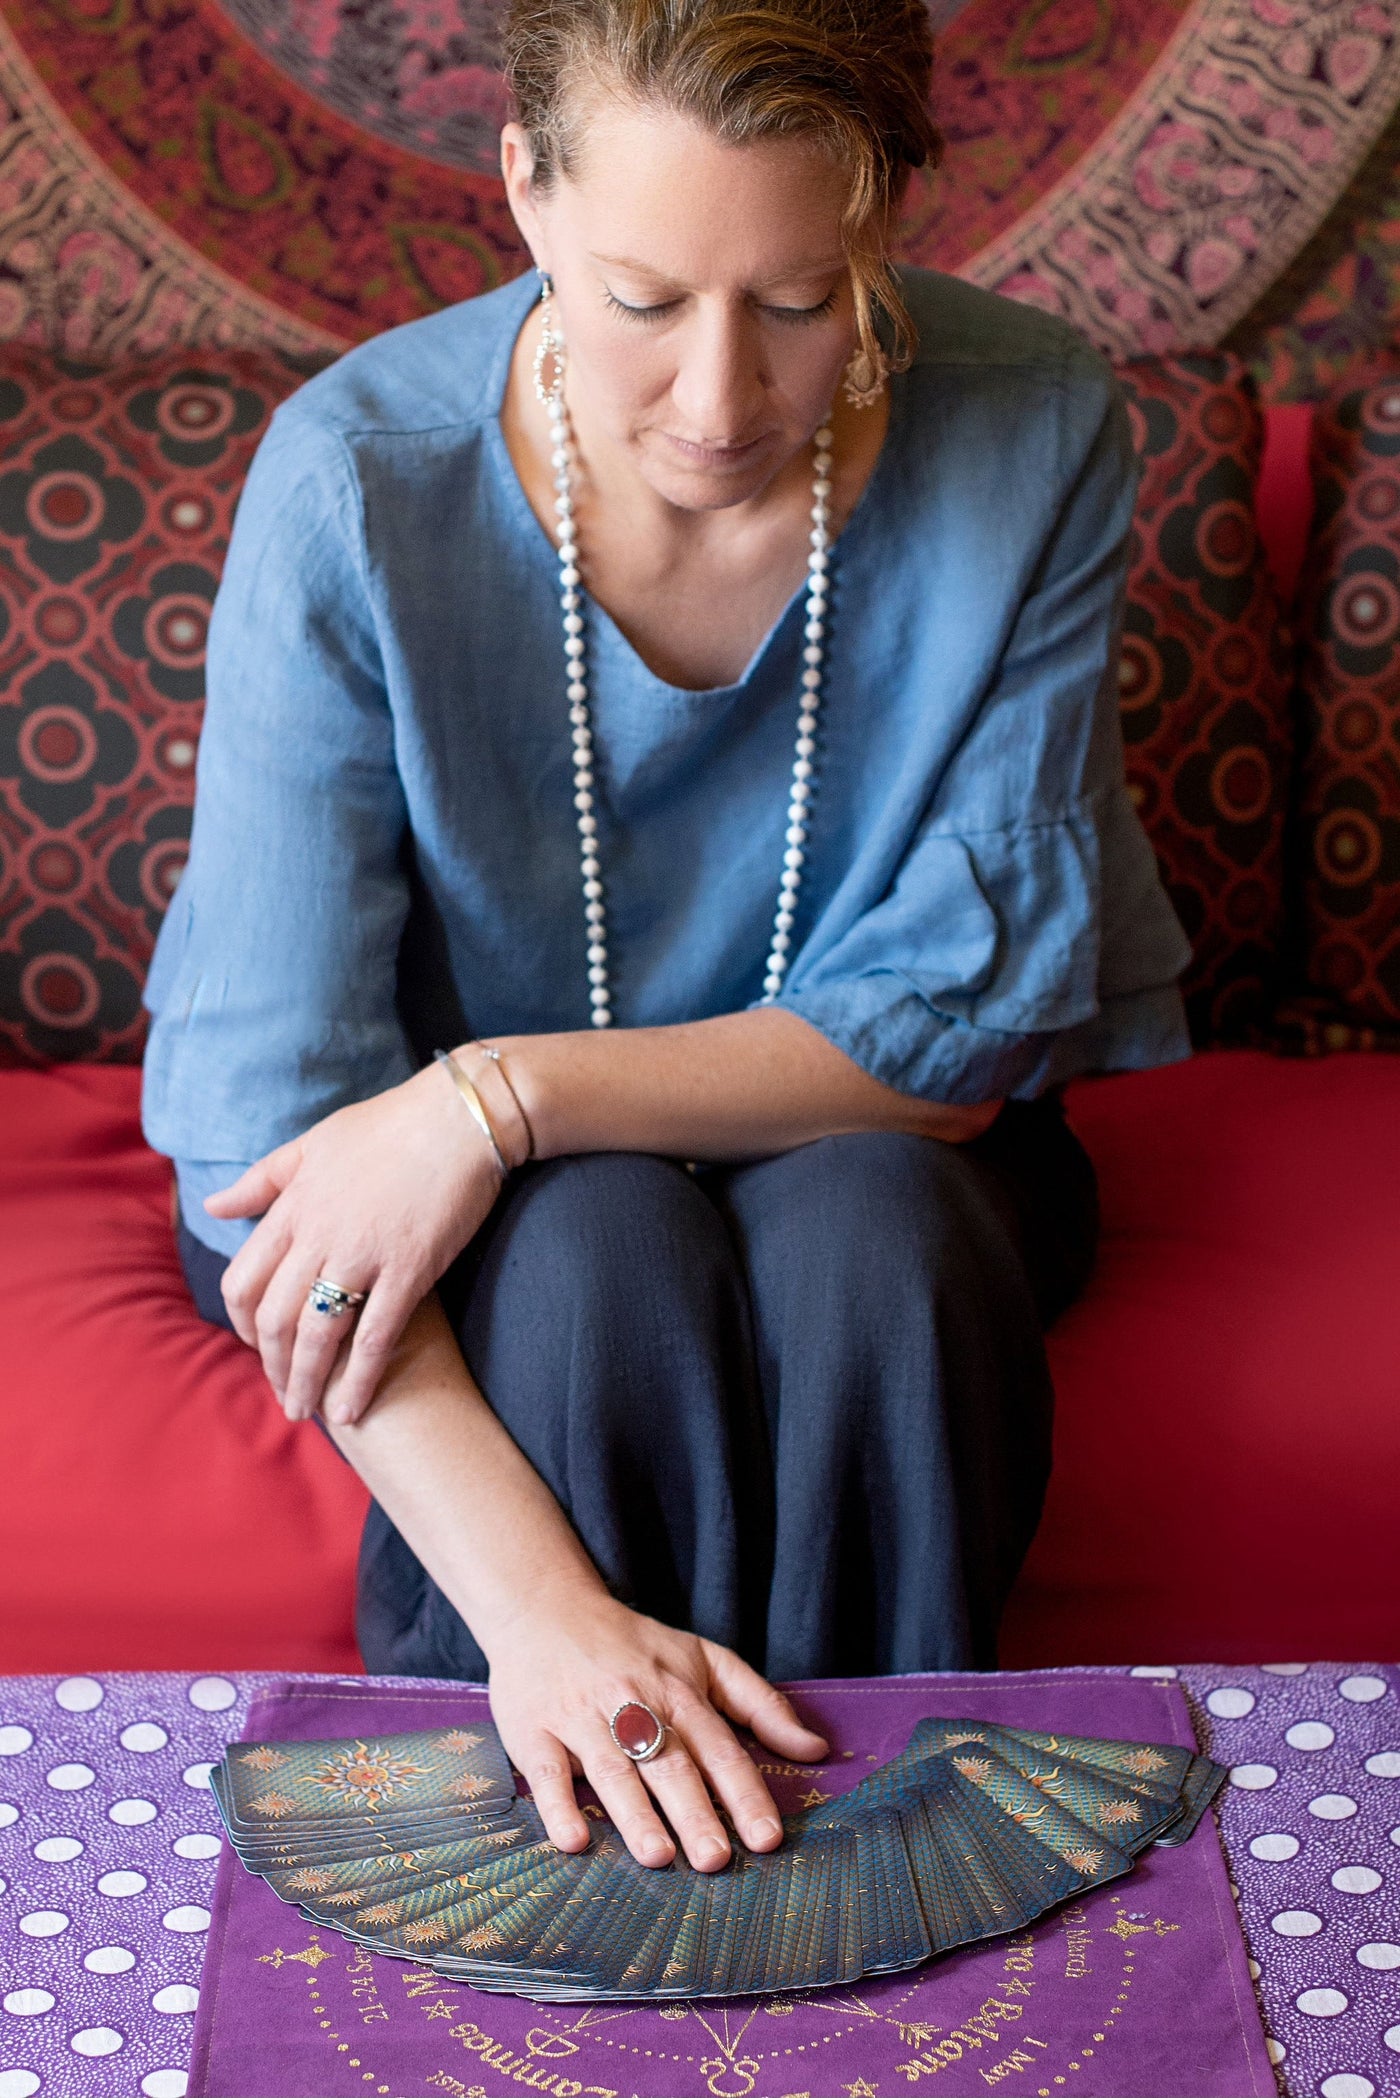 Tarot readings with Julie! Sat, Oct 21st 10:00-5:00PM